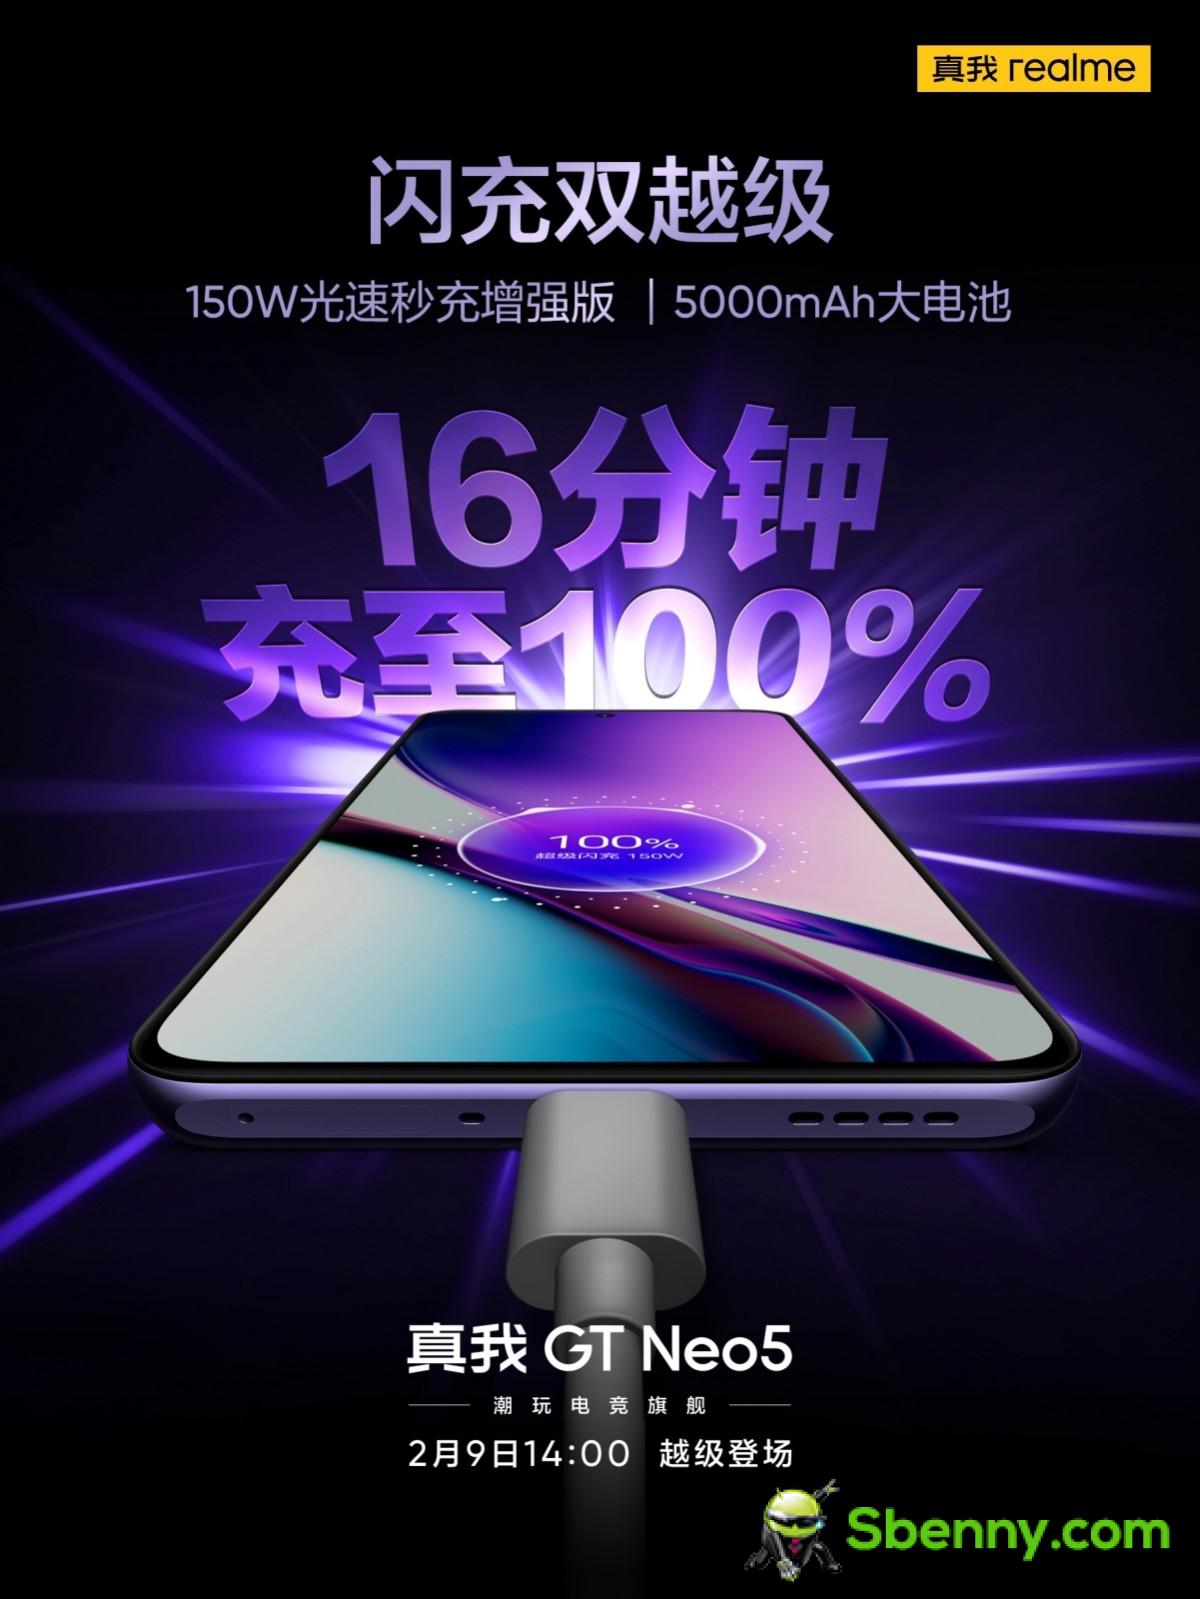 Realme Confirms GT Neo 5 Will Have 150W Variant